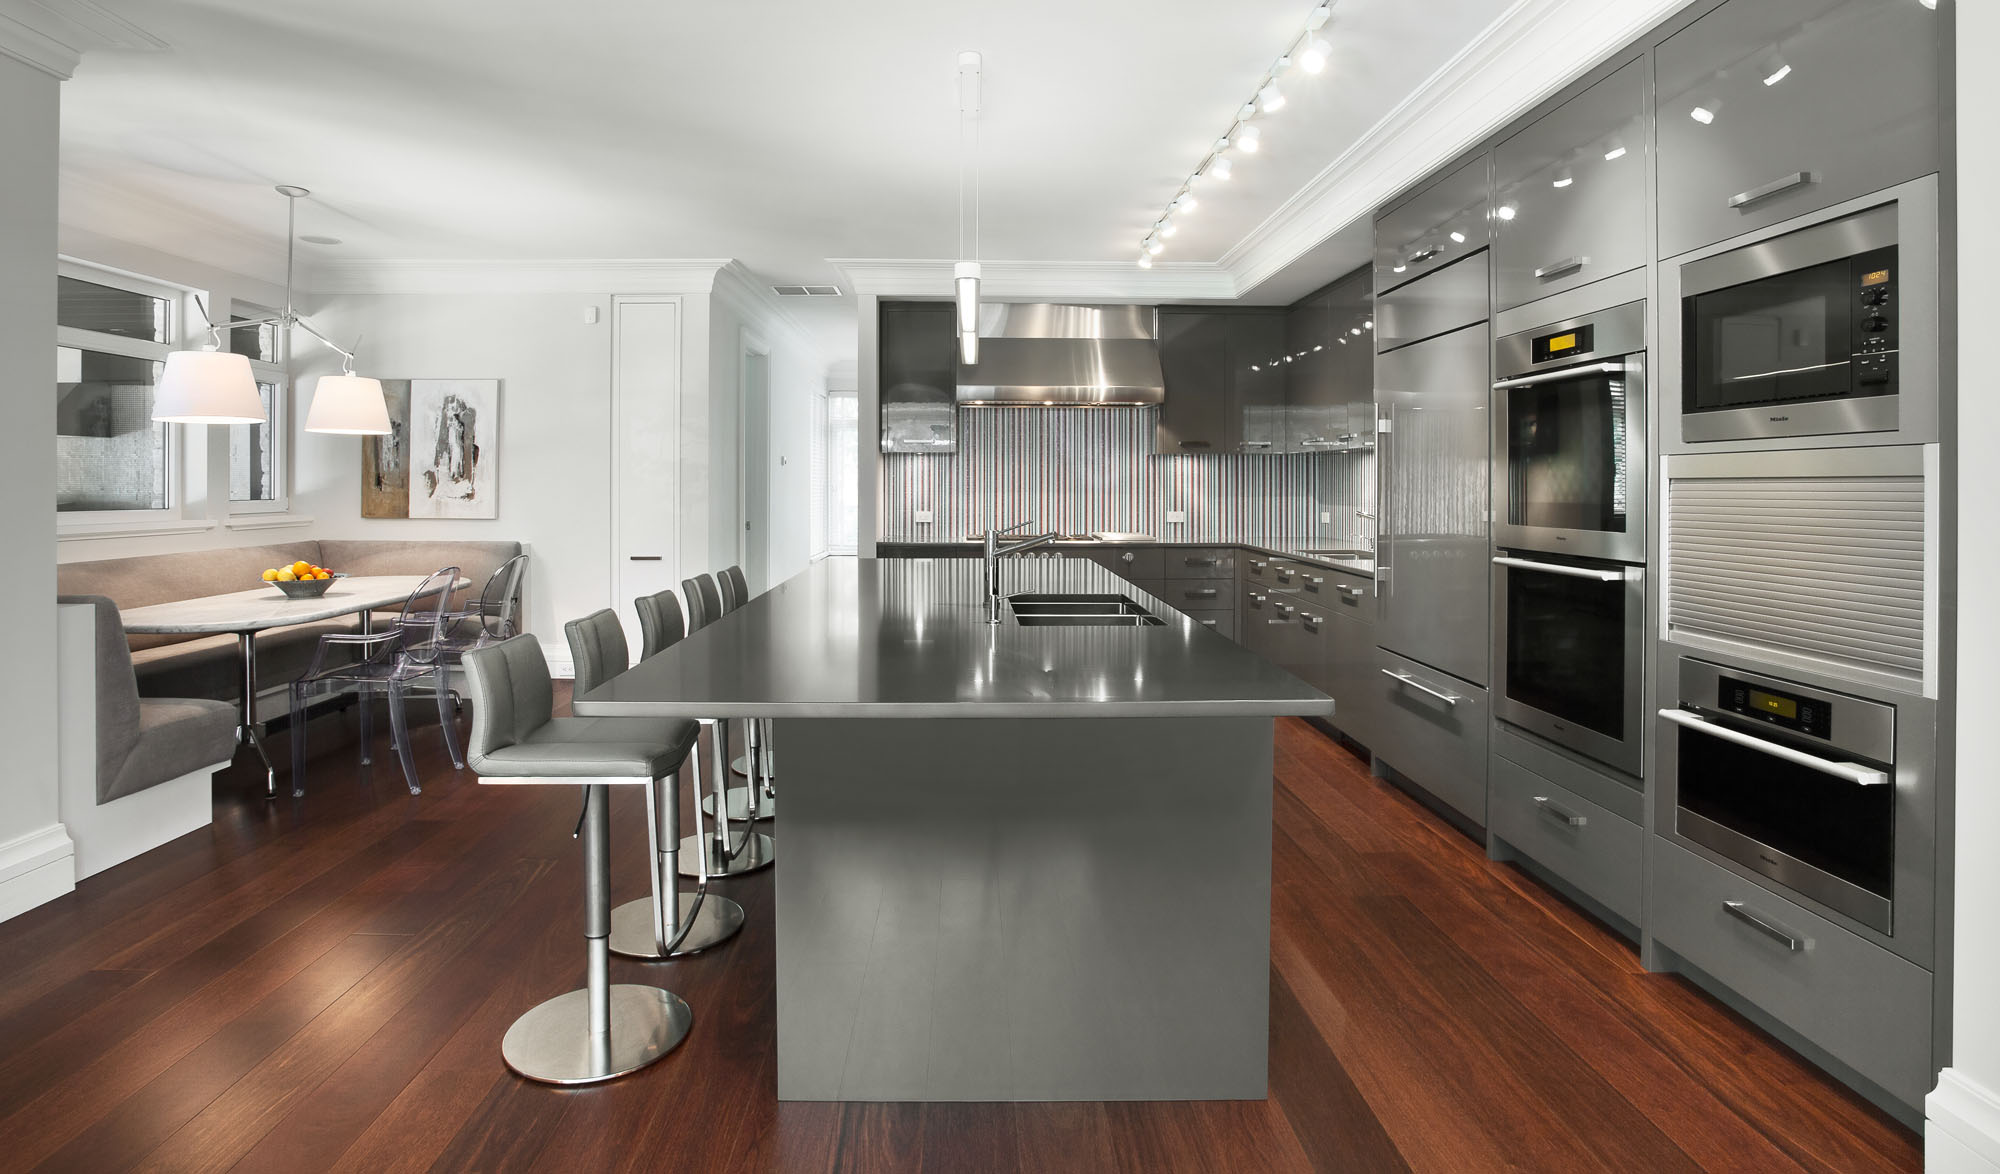 9045beautiful-glossy-silver-kitchen-cabinets-completed-grey-bar.jpg